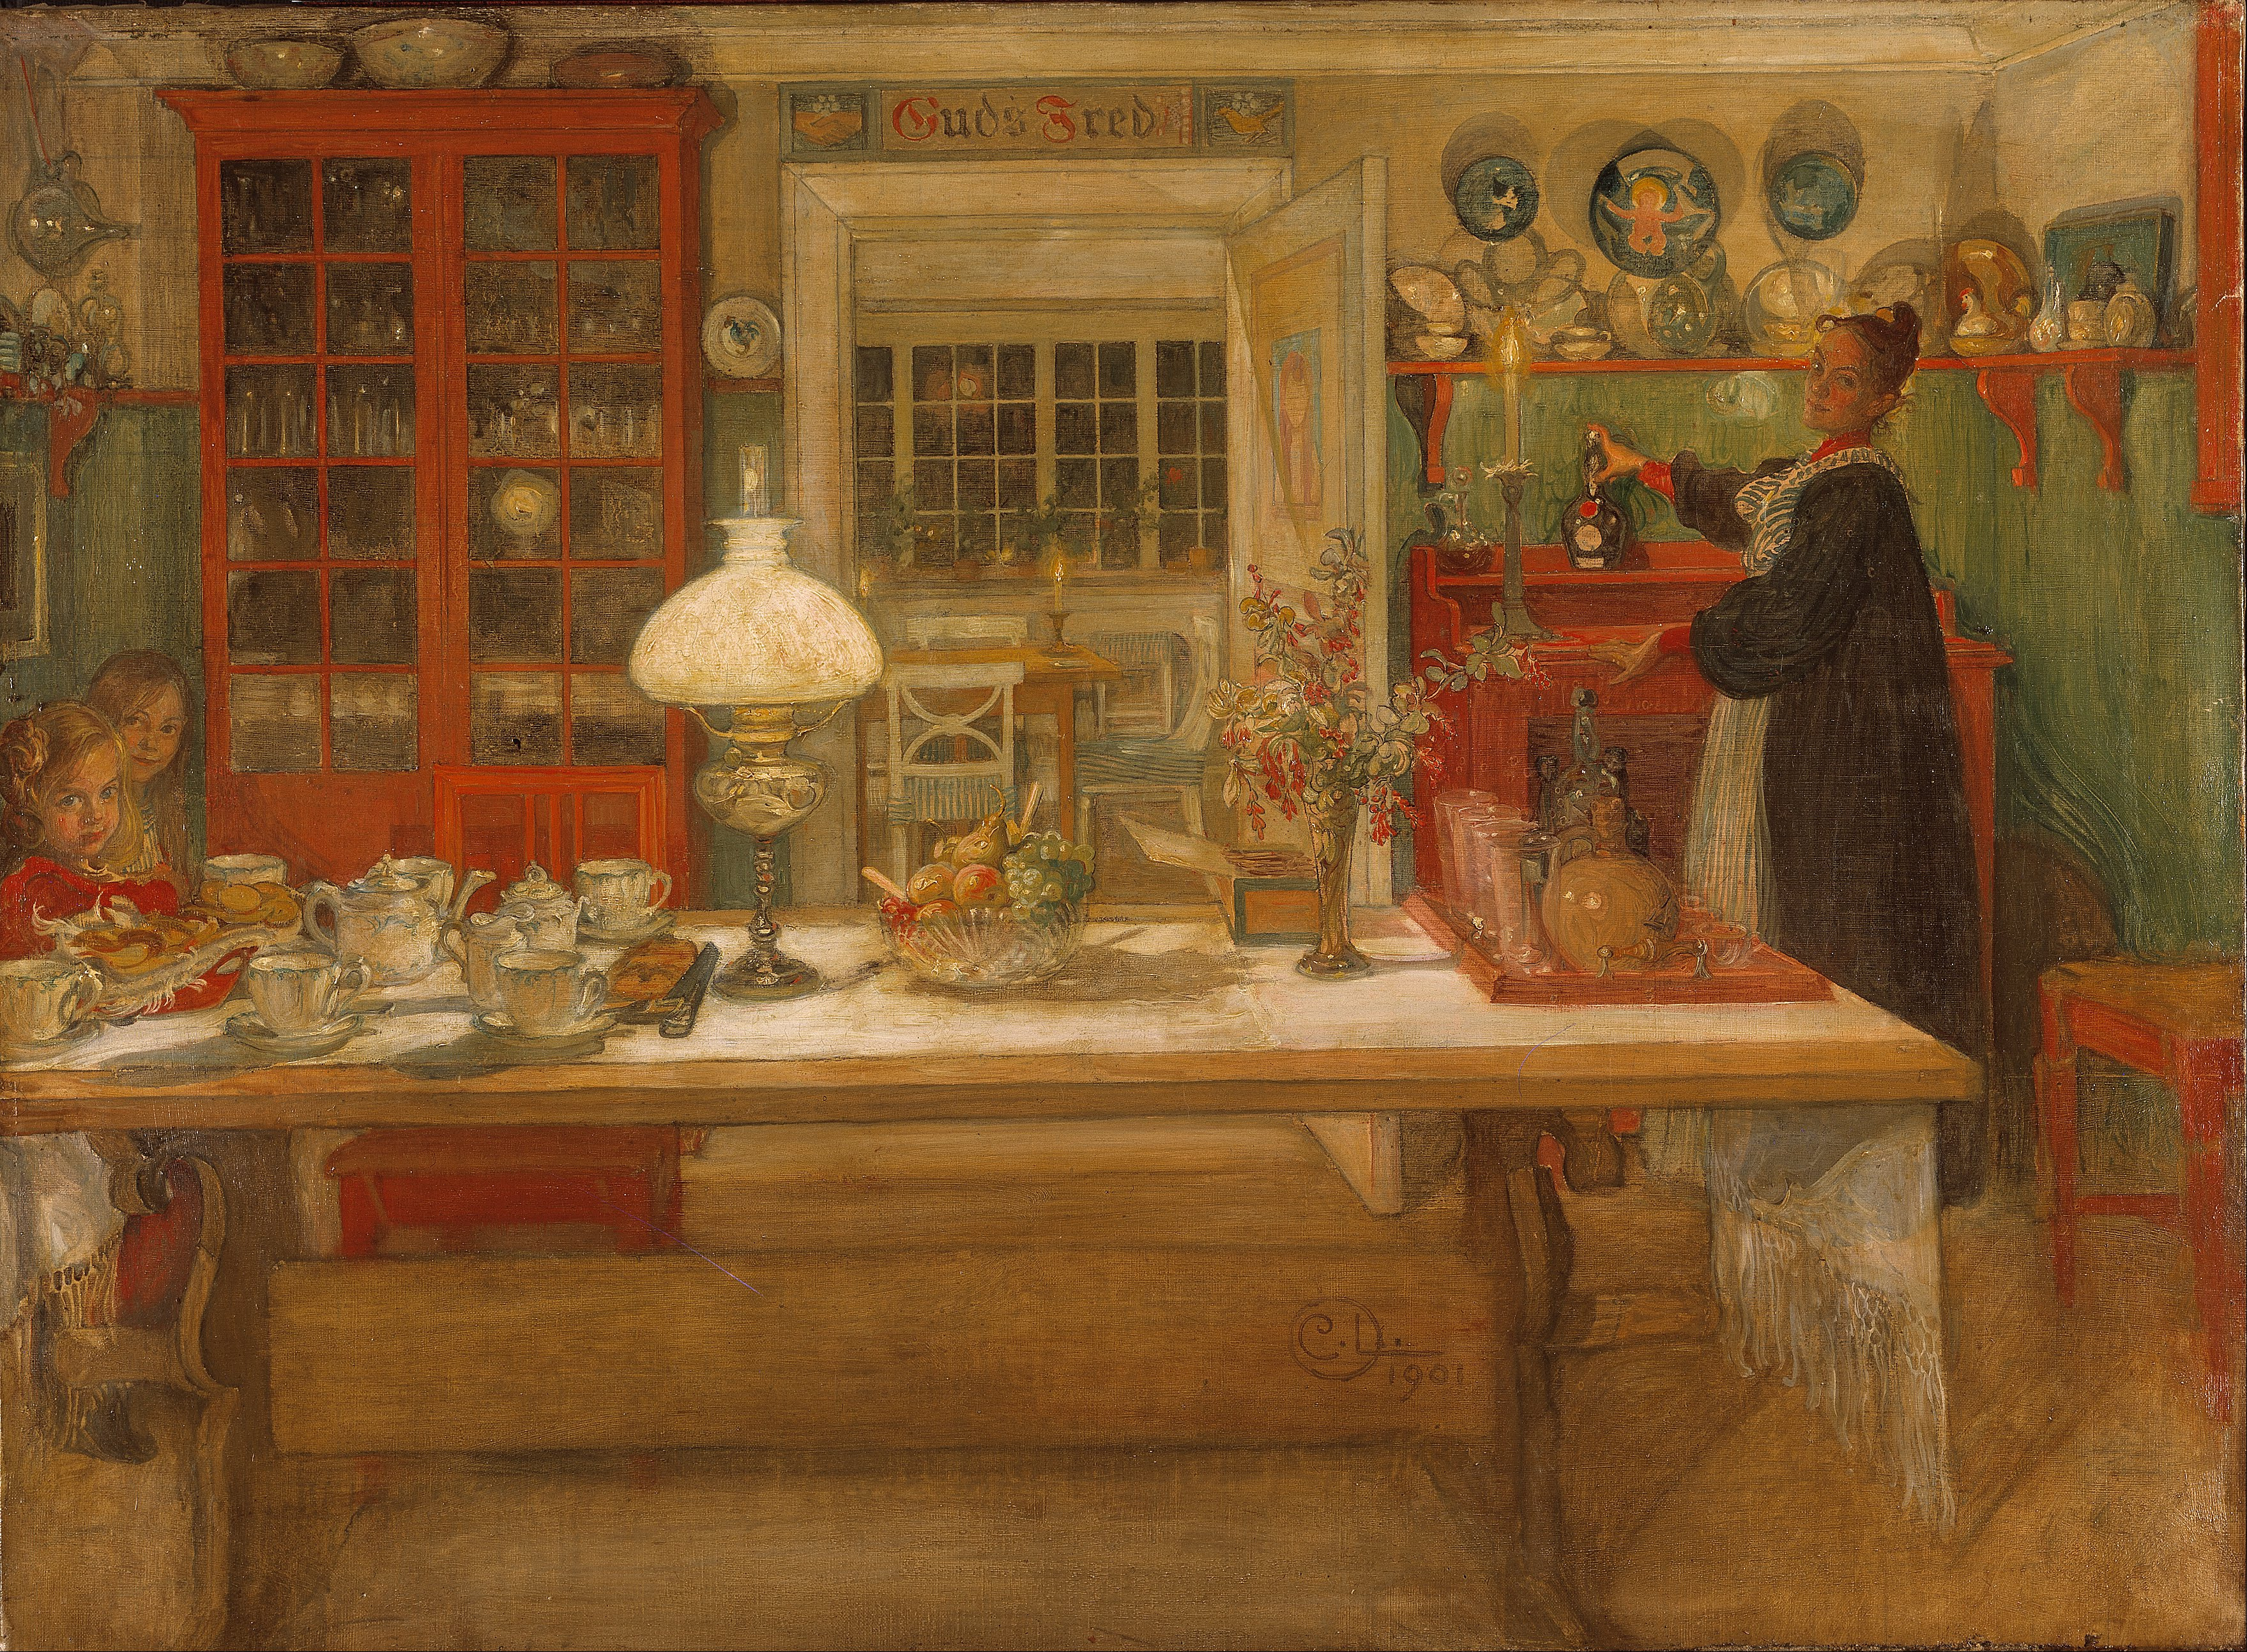 Getting Ready for a Game by Carl Larsson - 1901 - 68 x 92 cm Nationalmuseum